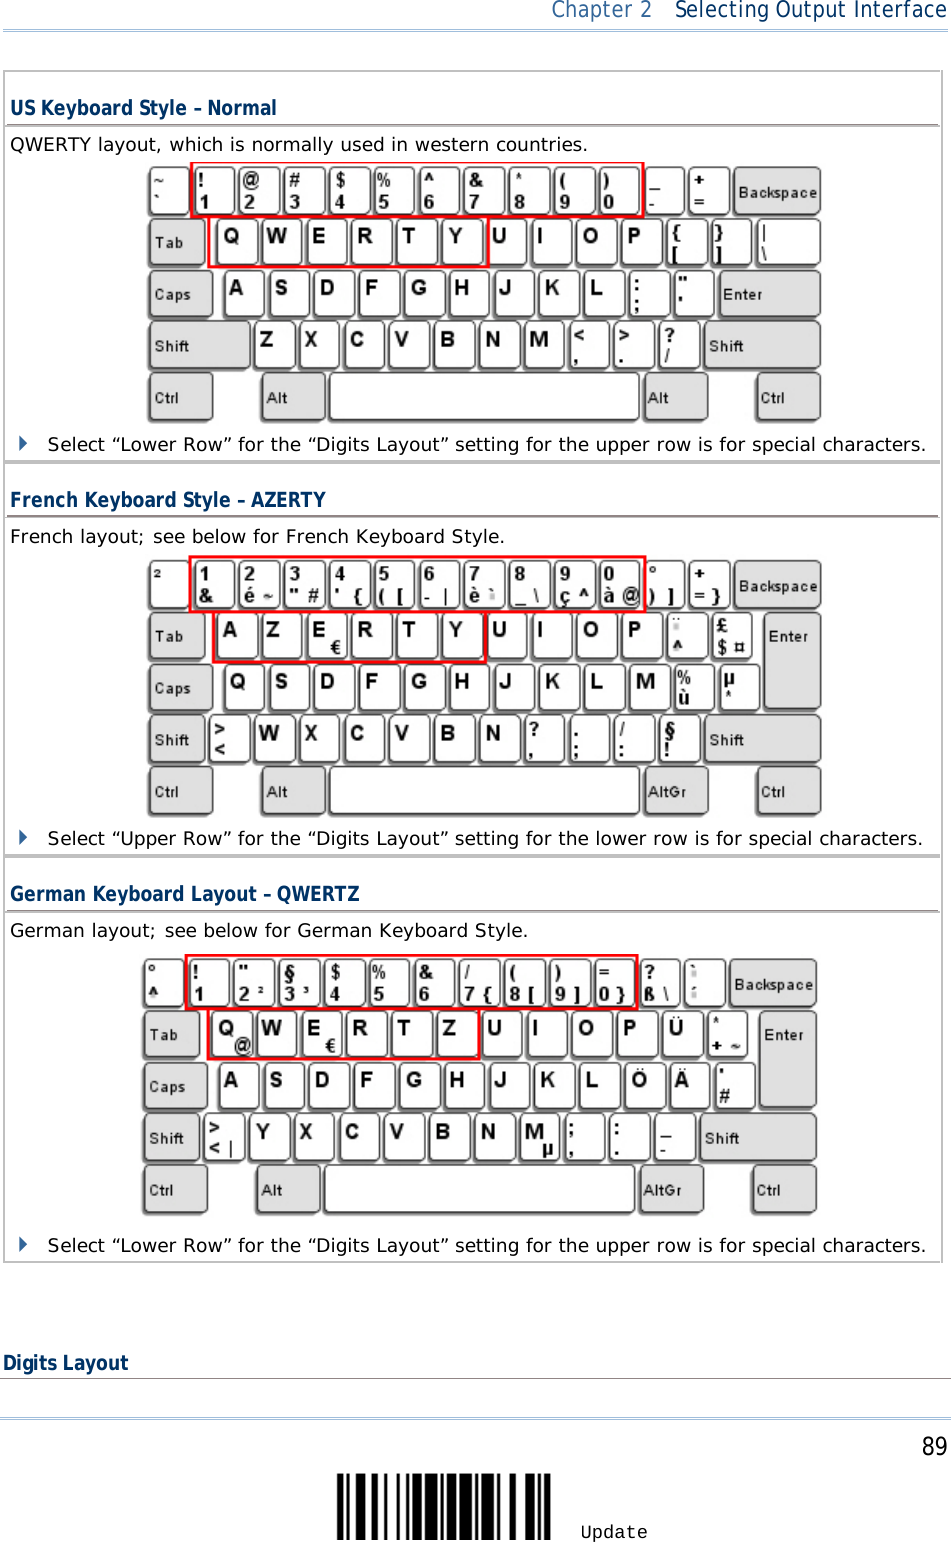  Chapter 2  Selecting Output Interface  US Keyboard Style – Normal QWERTY layout, which is normally used in western countries.                  Select “Lower Row” for the “Digits Layout” setting for the upper row is for special characters.  French Keyboard Style – AZERTY French layout; see below for French Keyboard Style.                  Select “Upper Row” for the “Digits Layout” setting for the lower row is for special characters.  German Keyboard Layout – QWERTZ German layout; see below for German Keyboard Style.                Select “Lower Row” for the “Digits Layout” setting for the upper row is for special characters.     Digits Layout     89 Update 